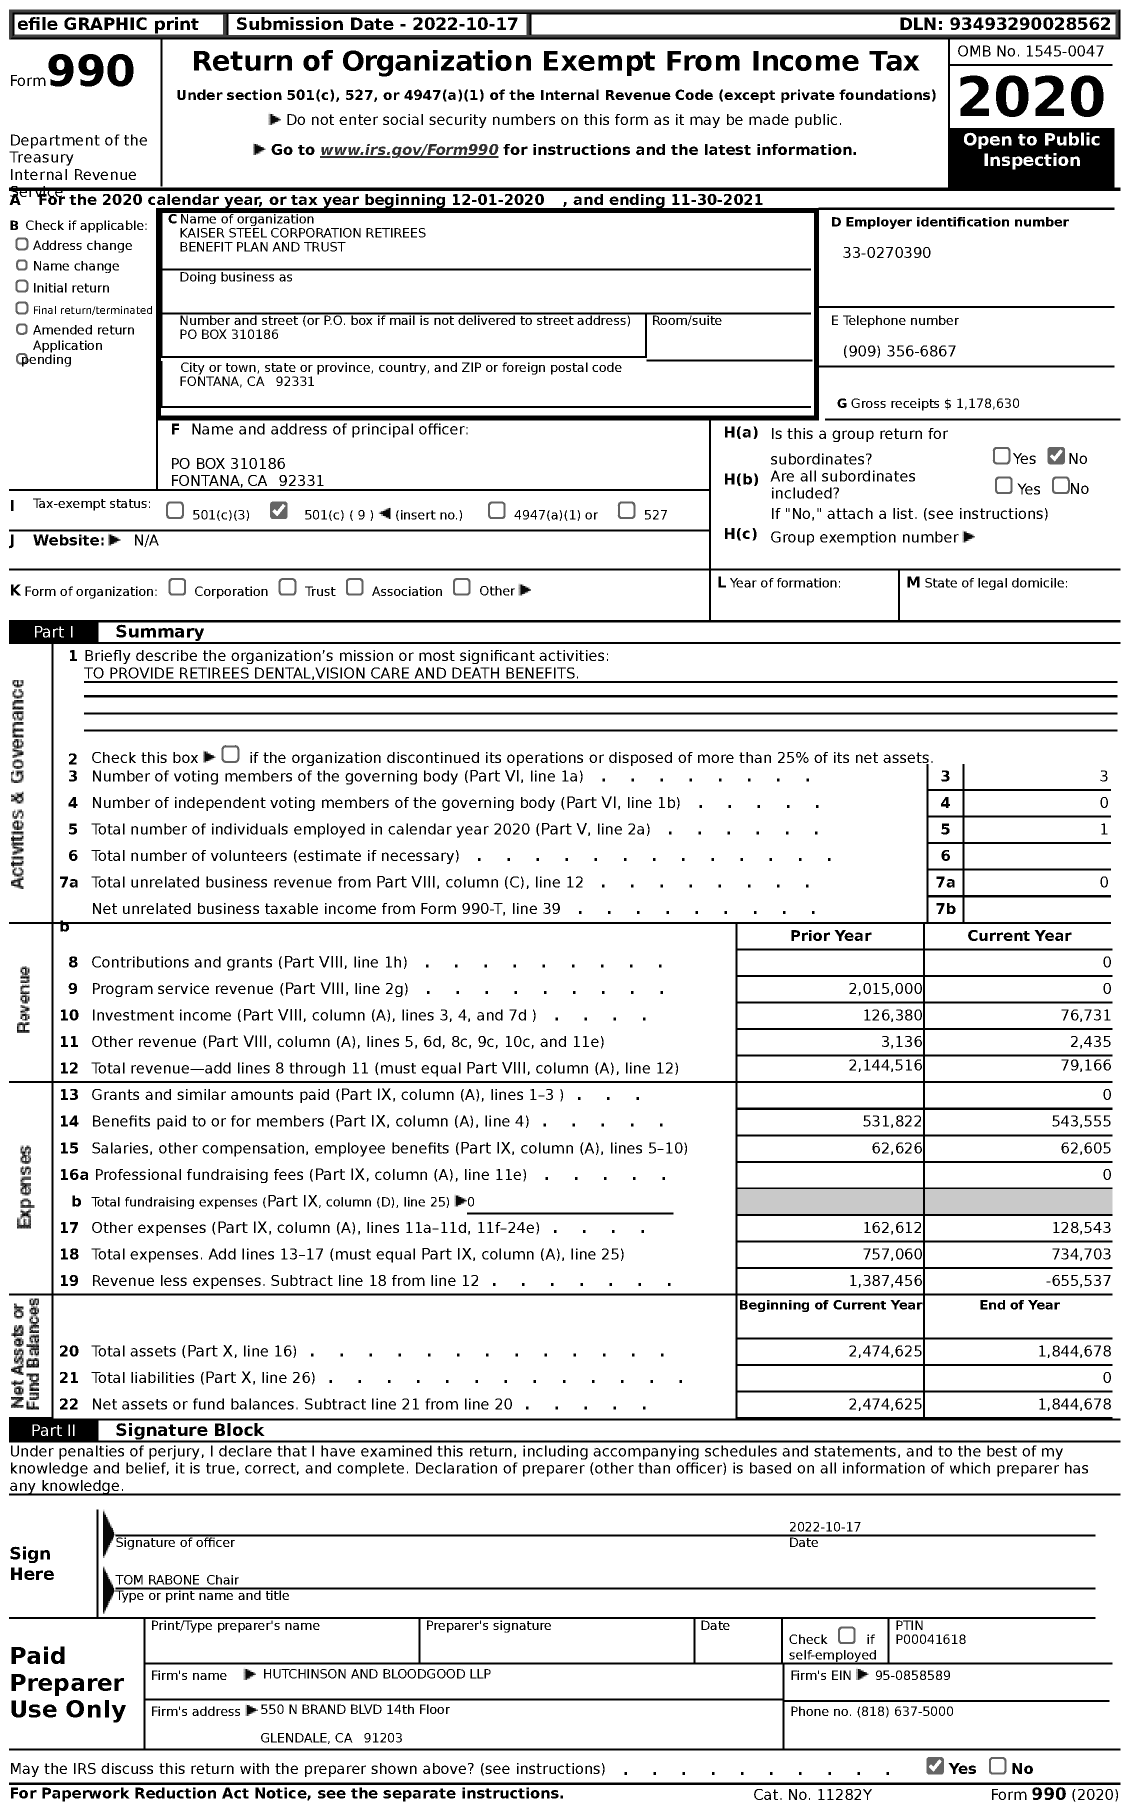 Image of first page of 2020 Form 990 for Kaiser Steel Corporation Retirees Benefit Plan and Trust